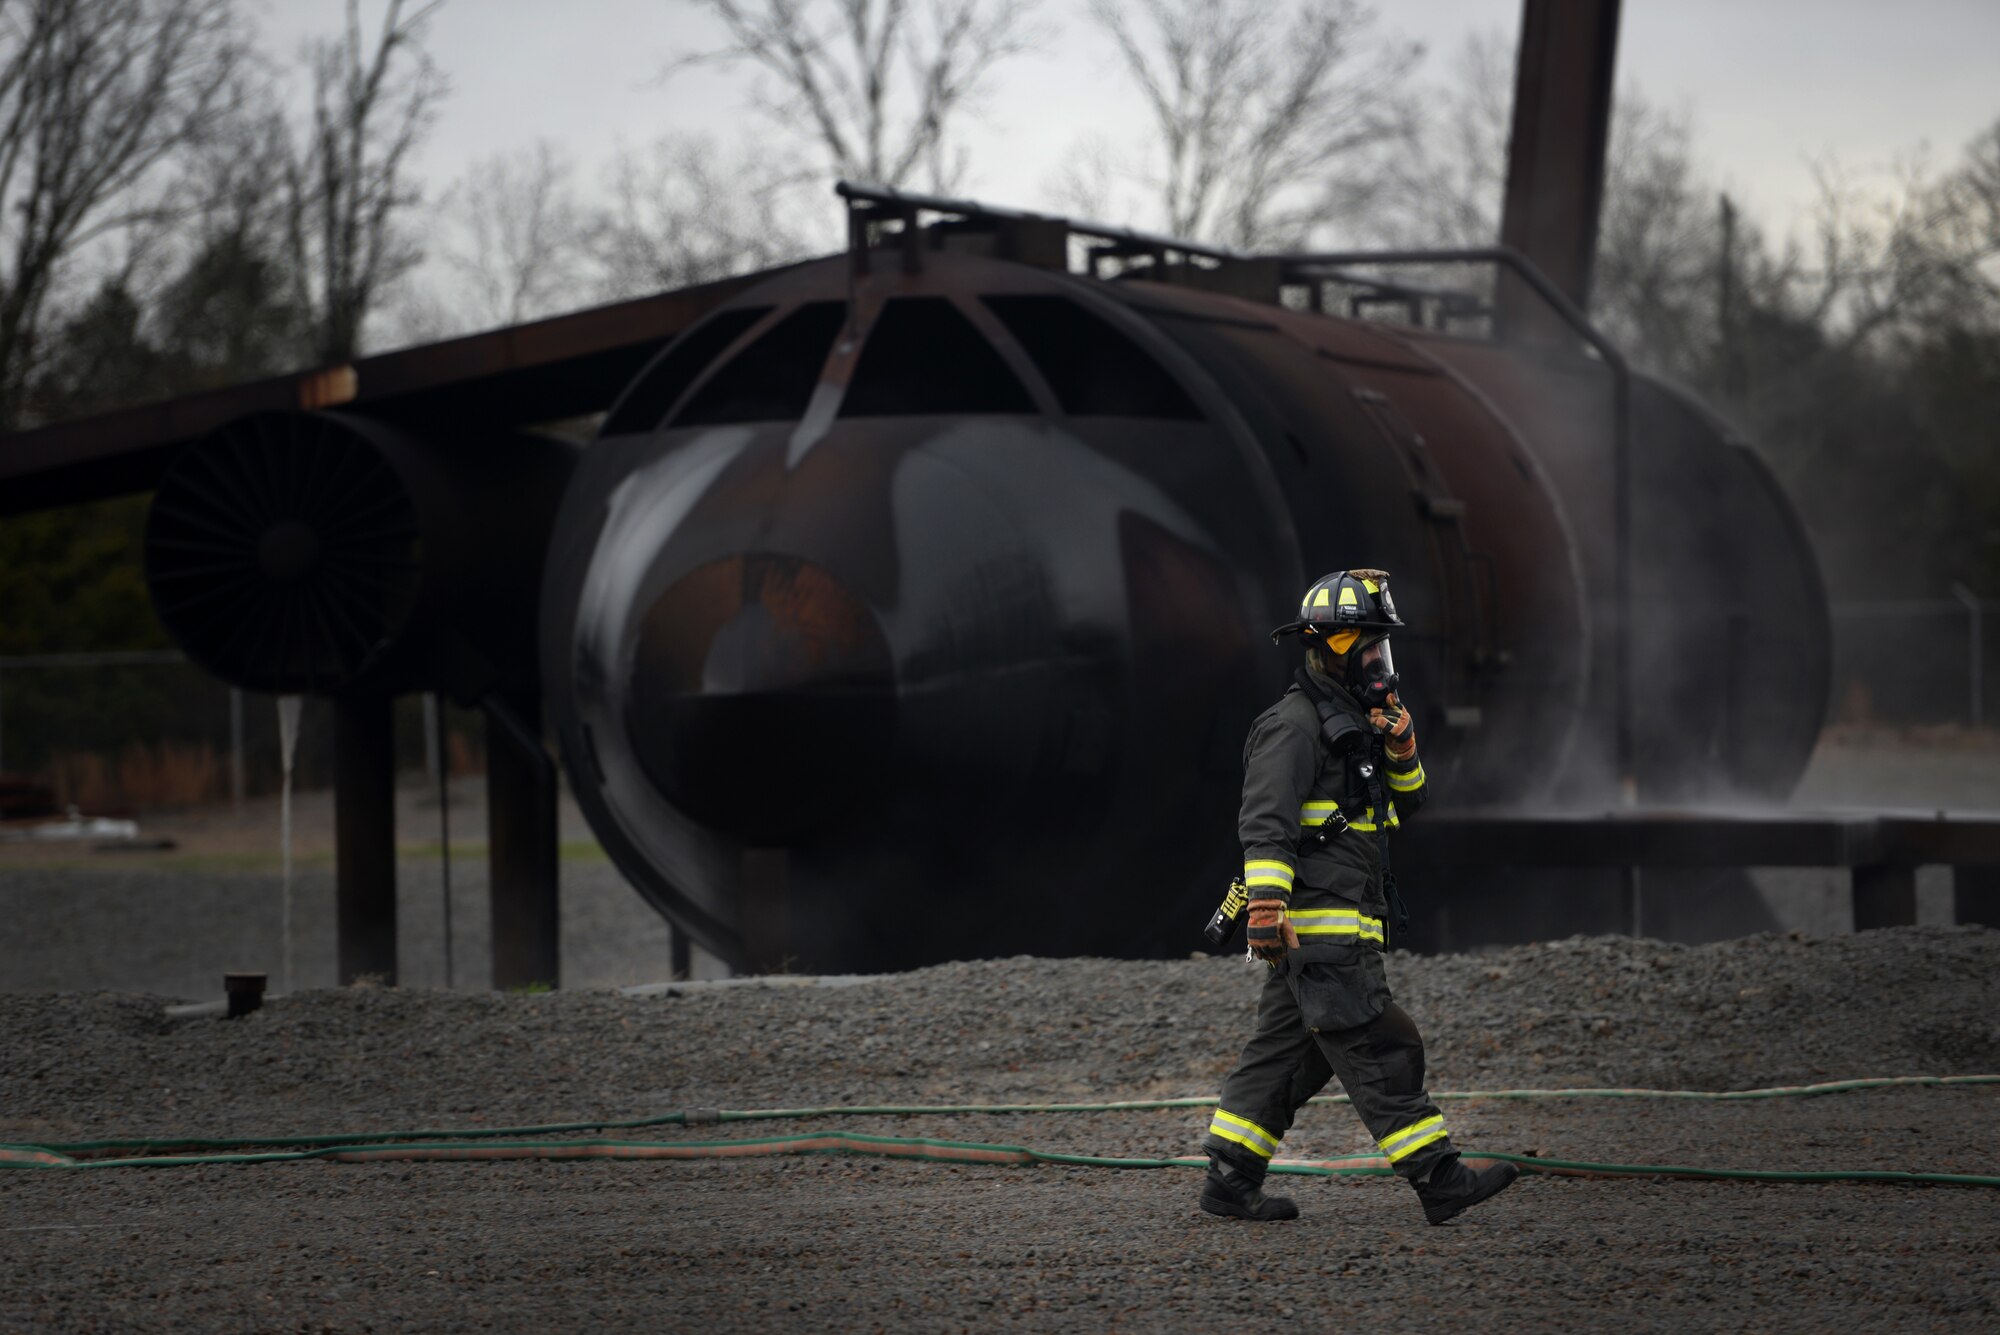 A firefighter walks in front of a simulated aircraft while wearing fire protection equipment.